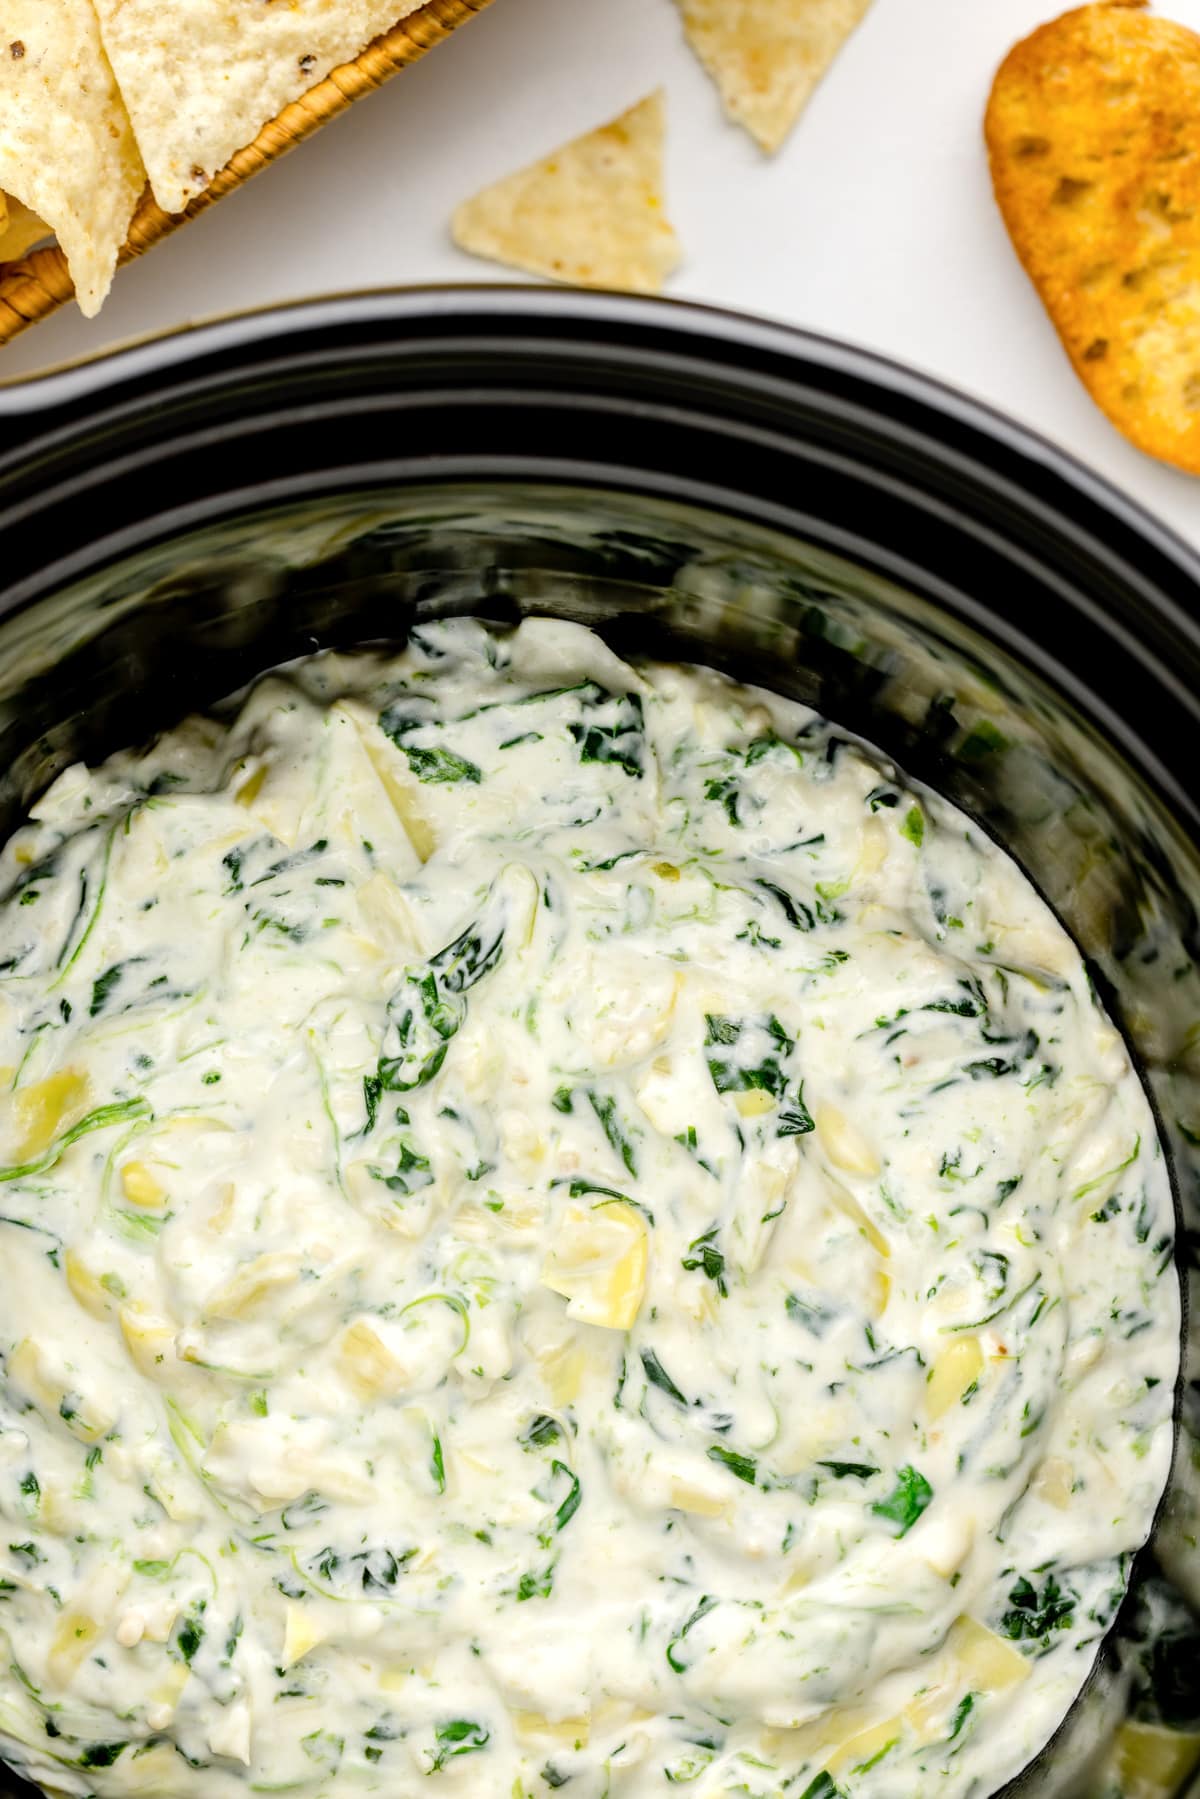 Crockpot spinach artichoke dip cooked and warming in a crockpot.